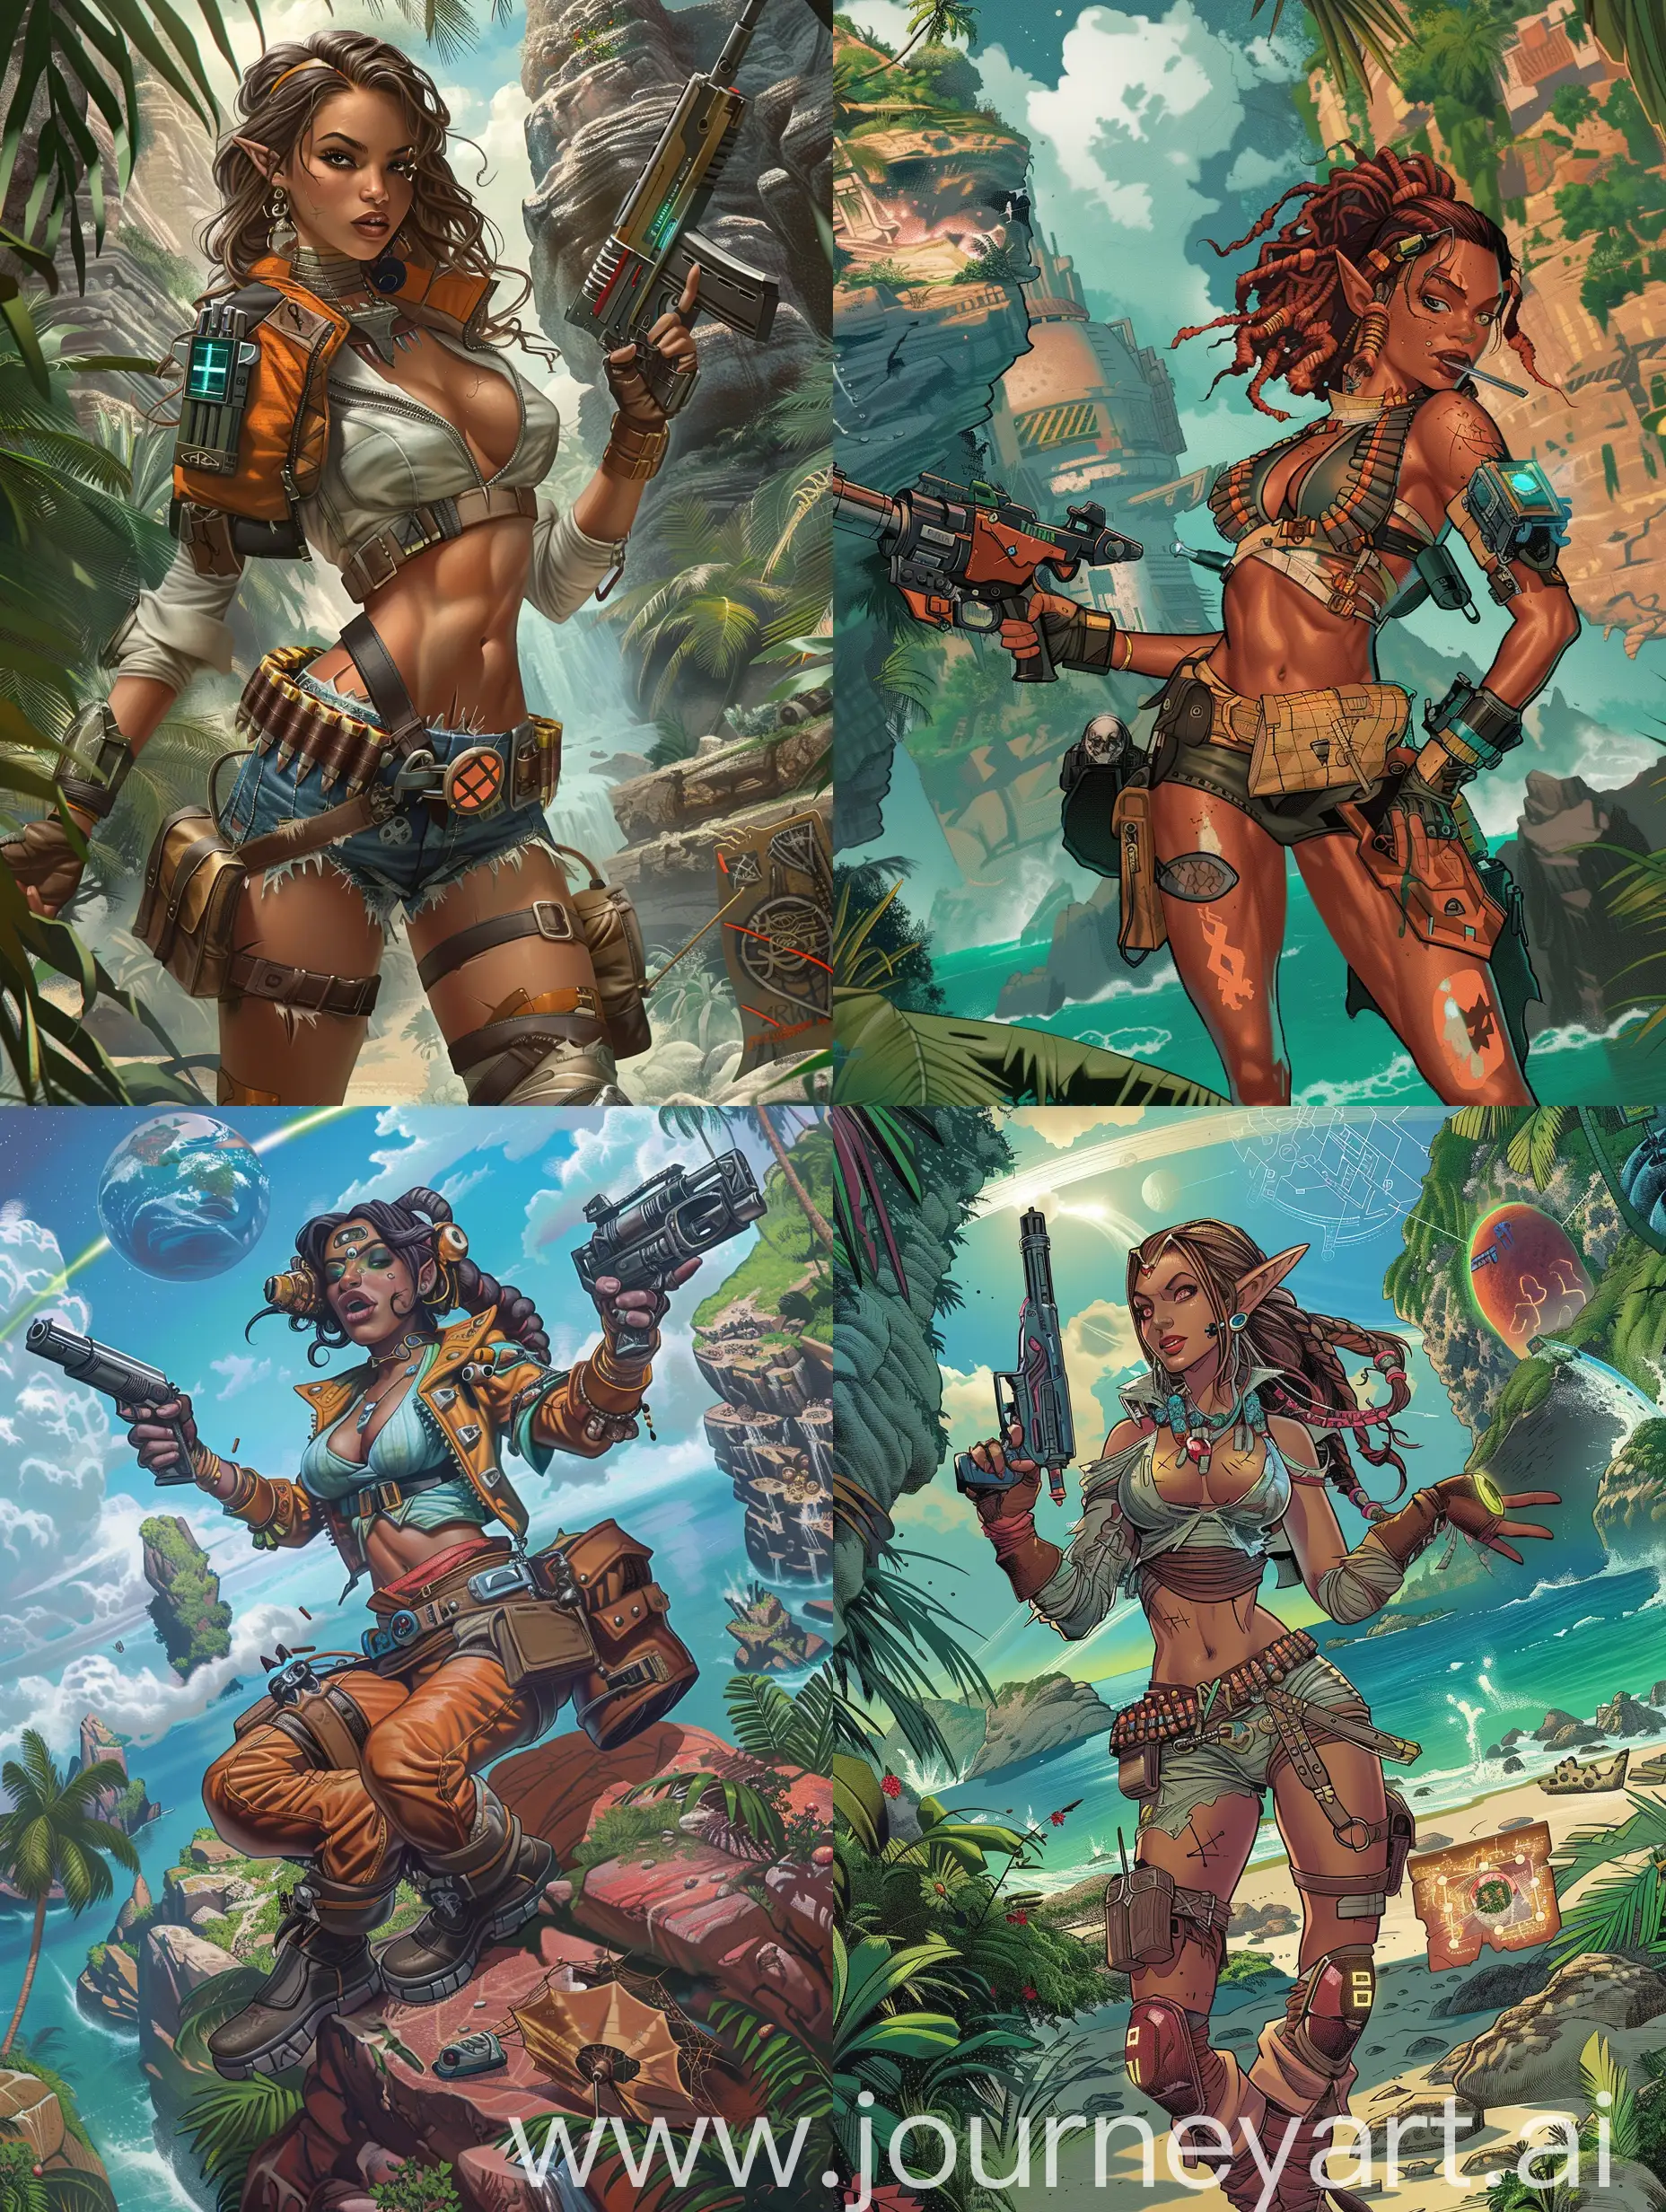 Exquisite-Female-Space-Pirate-with-Blaster-and-Cybermap-on-Alien-Tropical-Island